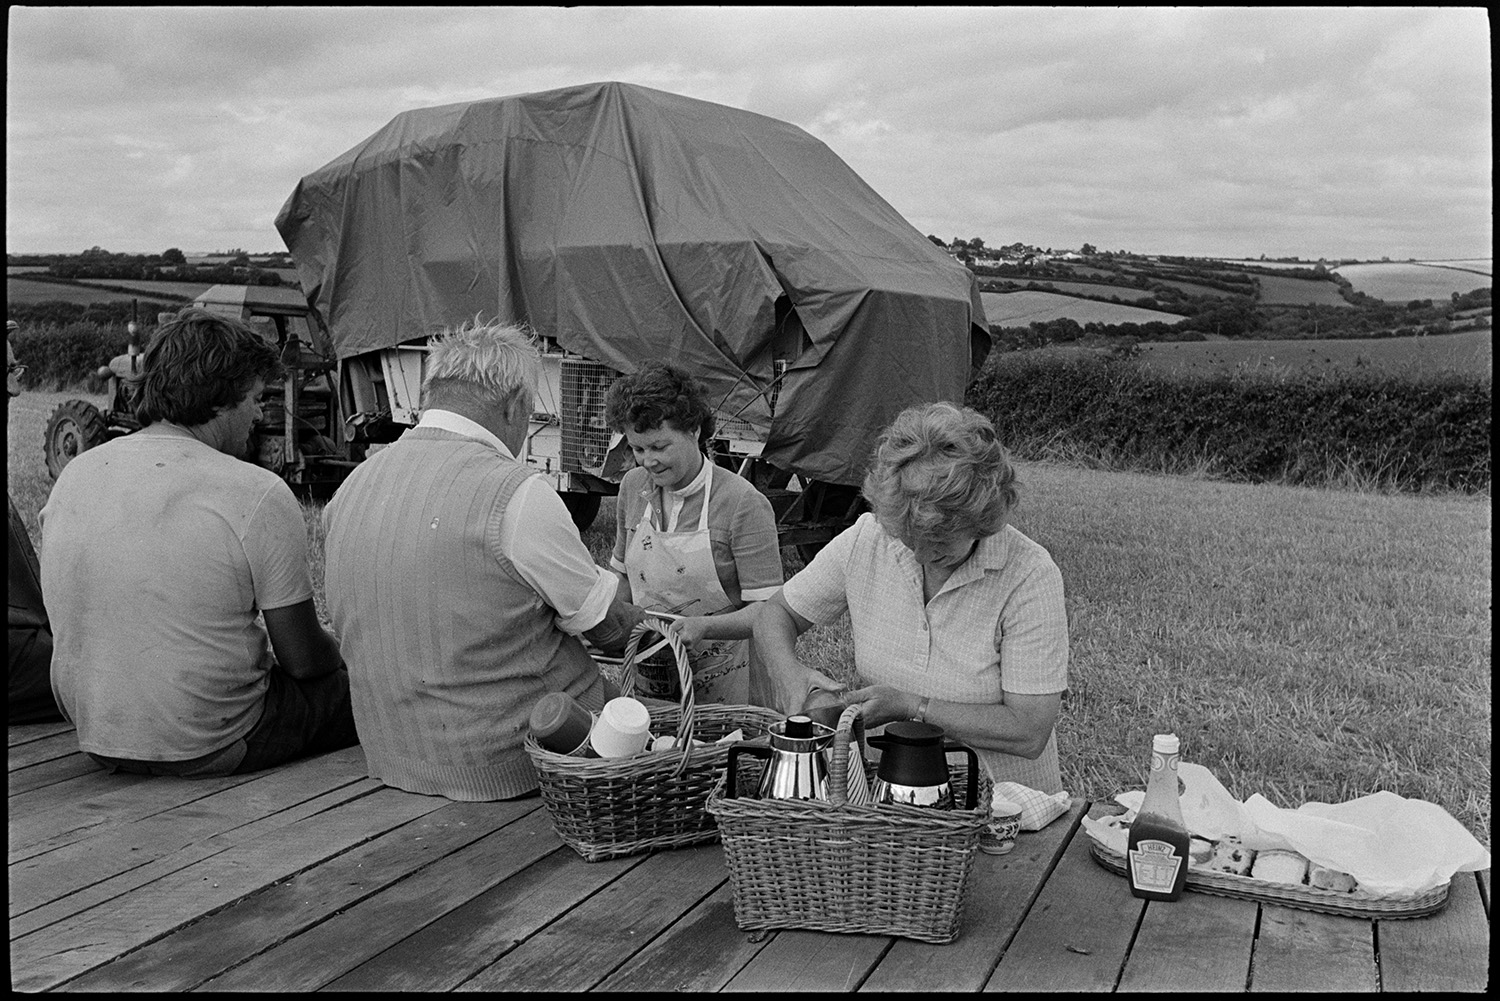 Woman farmers wife serving refreshments to harvesters in the field. 
[Pam Down, on the left, and another woman serving refreshments to men reedcombing in a field at Spittle, Chulmleigh. The men are sat on a trailer. The reed comber can be seen in the background under a polythene sheet.]